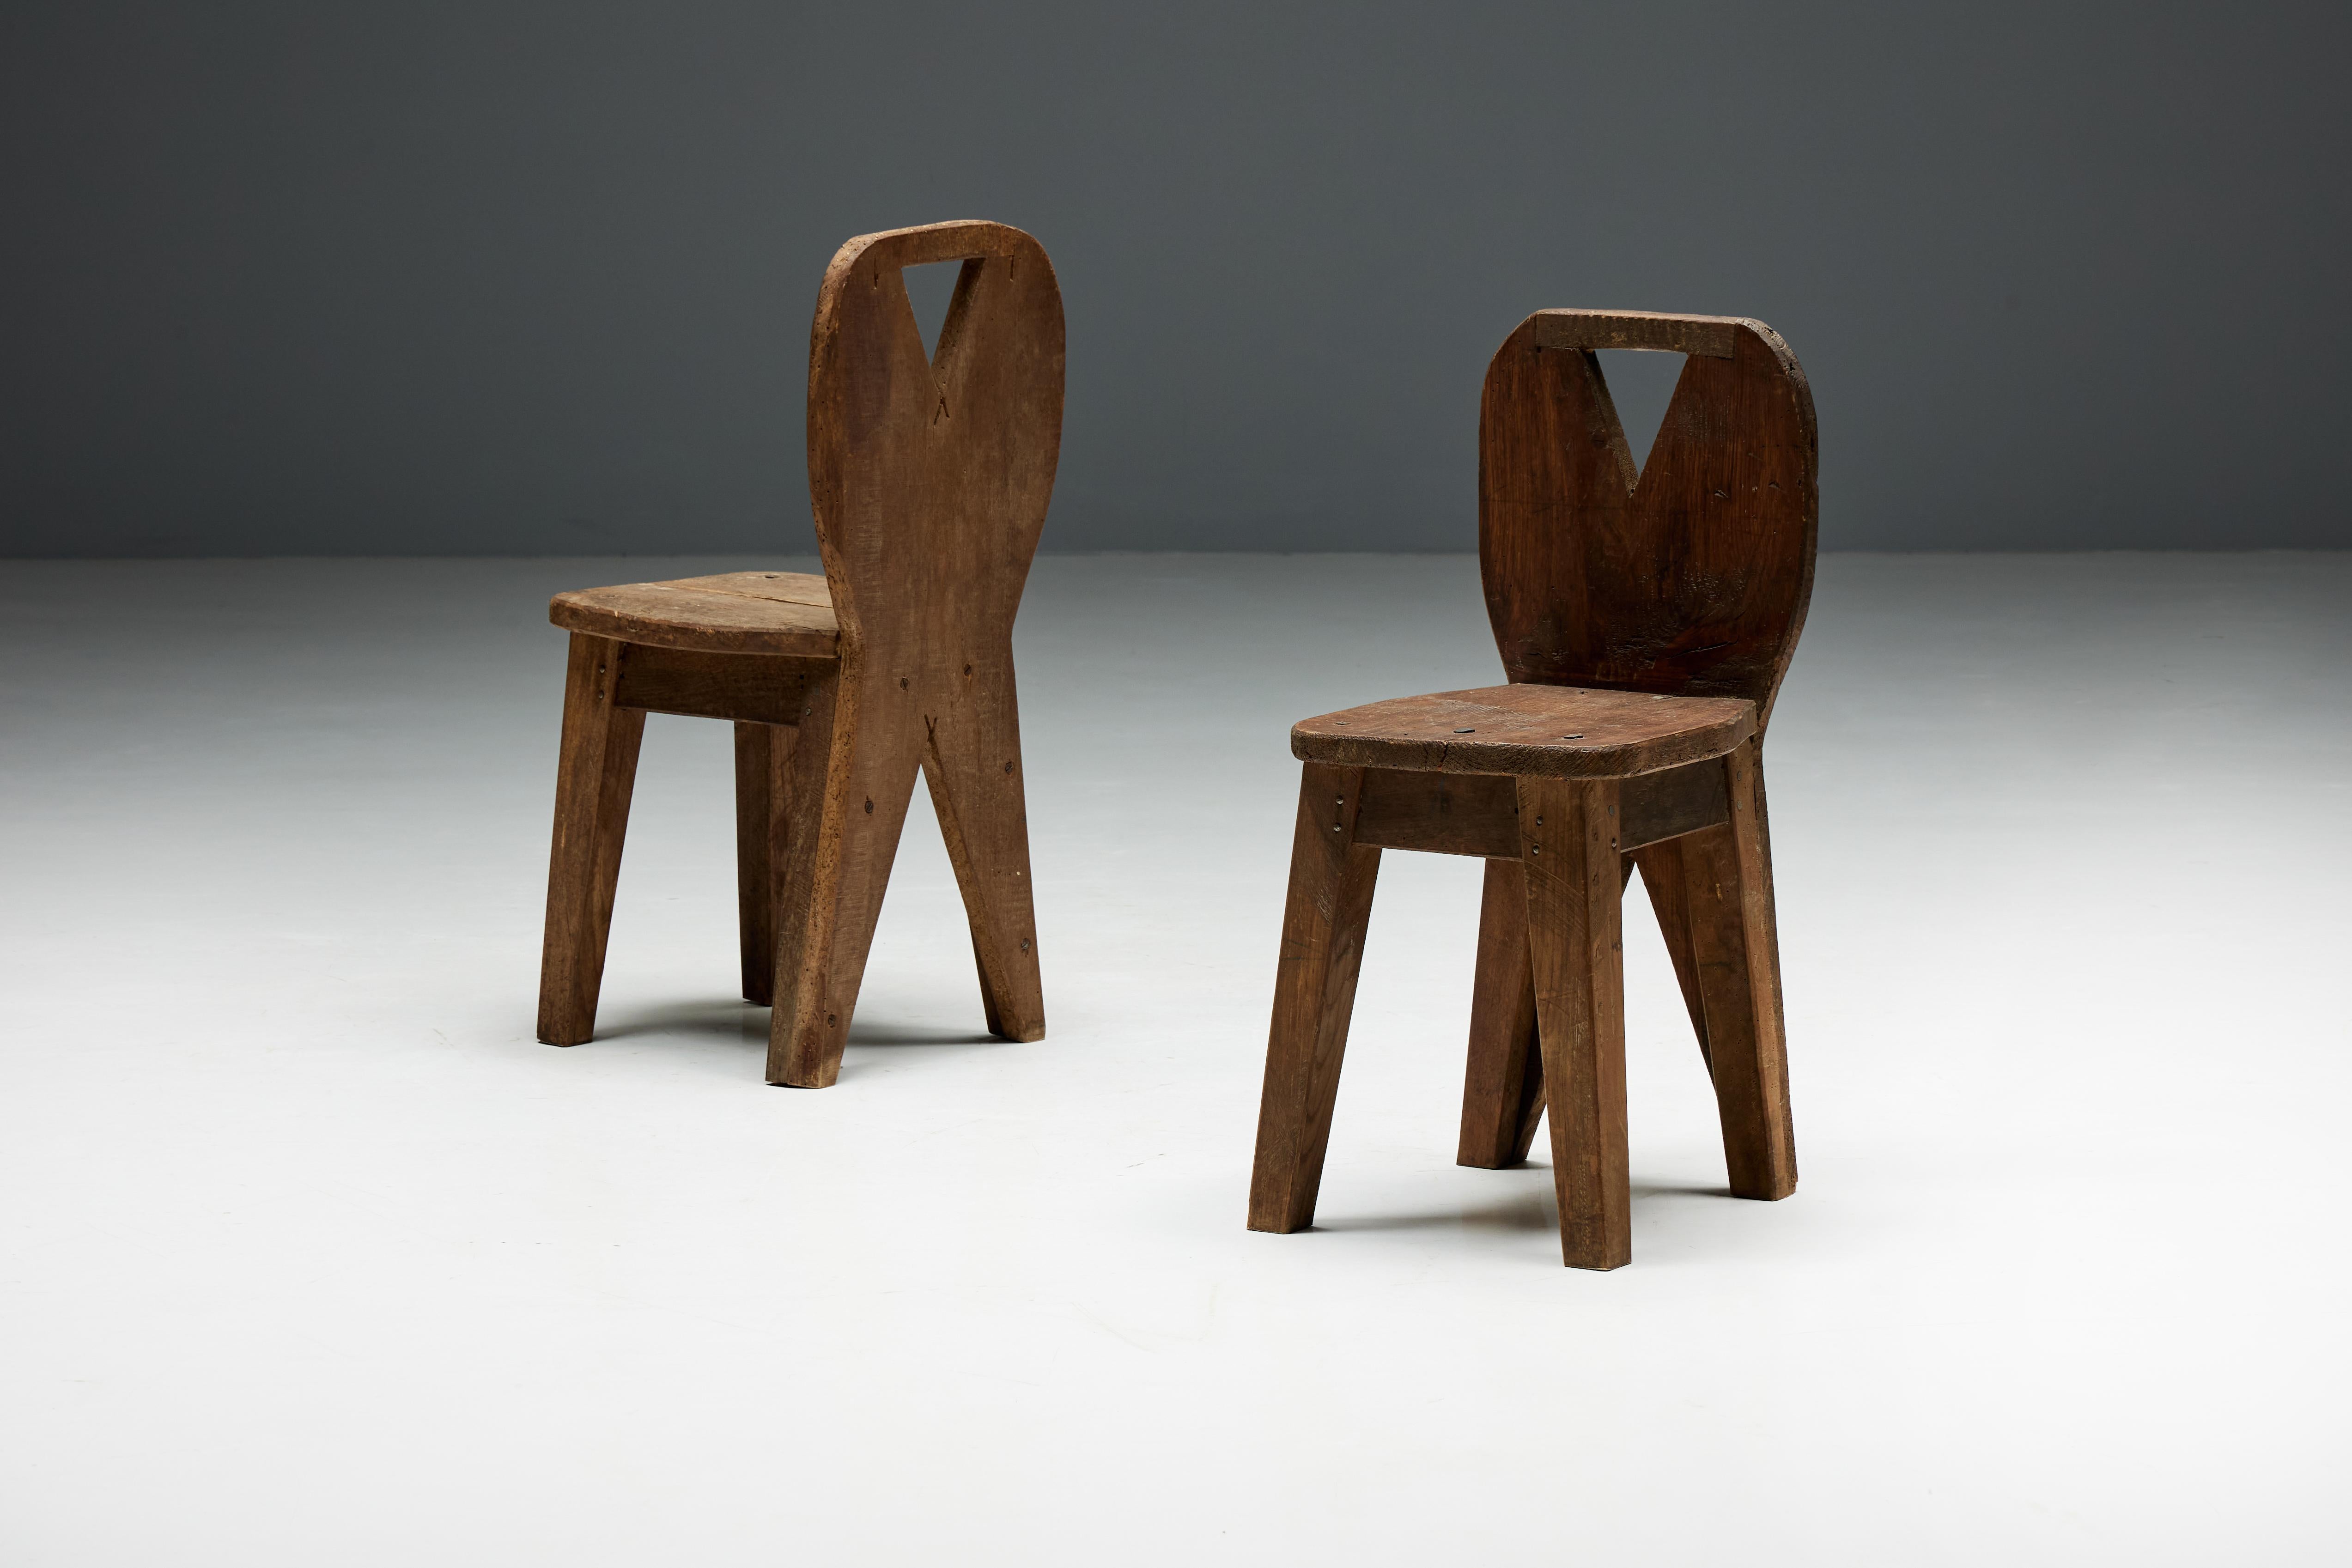 Wood Brutalist Art Populaire Mountain Chairs, France, 1950s For Sale